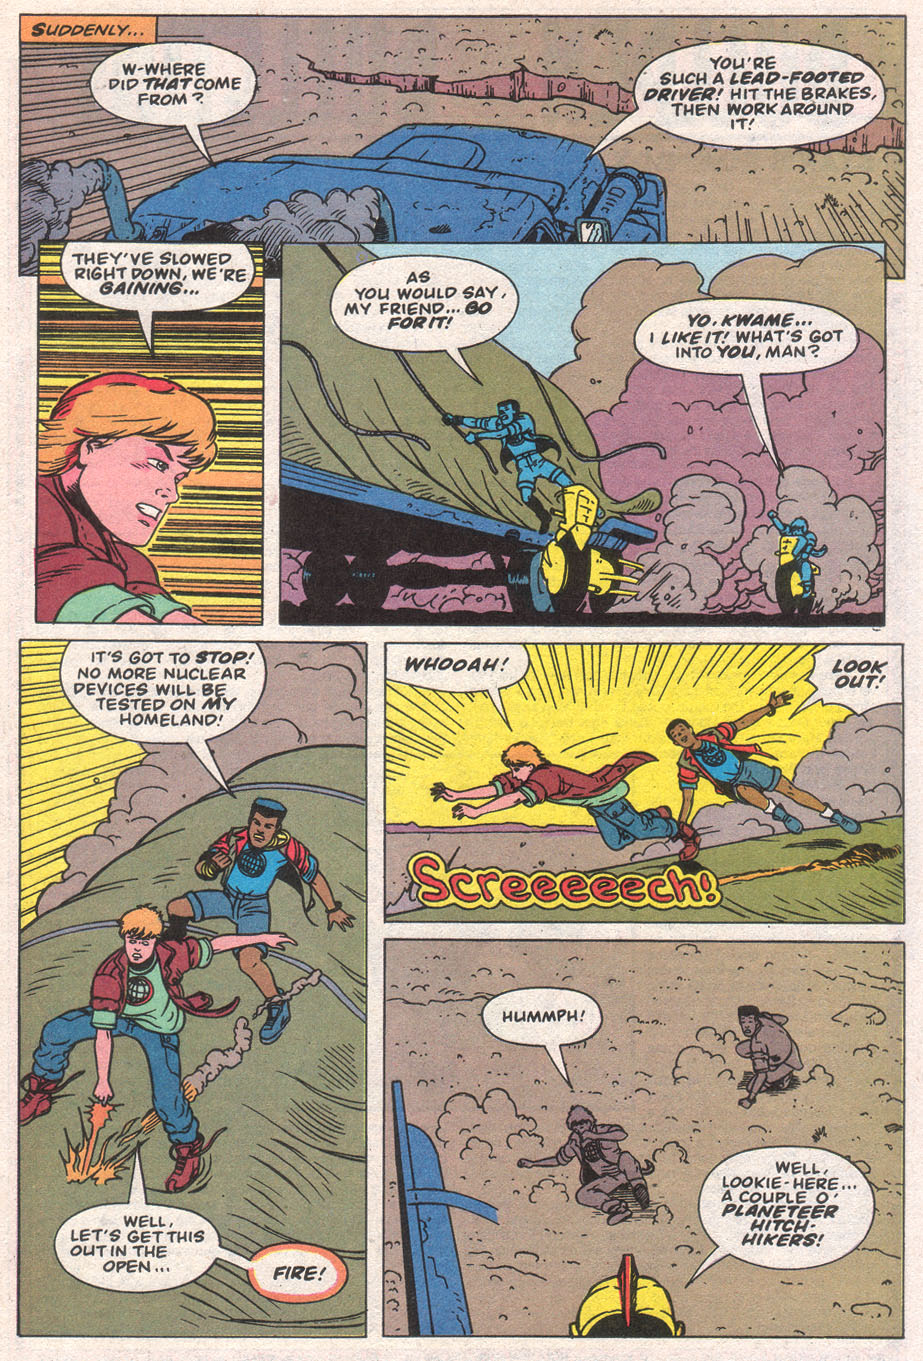 Captain Planet and the Planeteers 11 Page 25